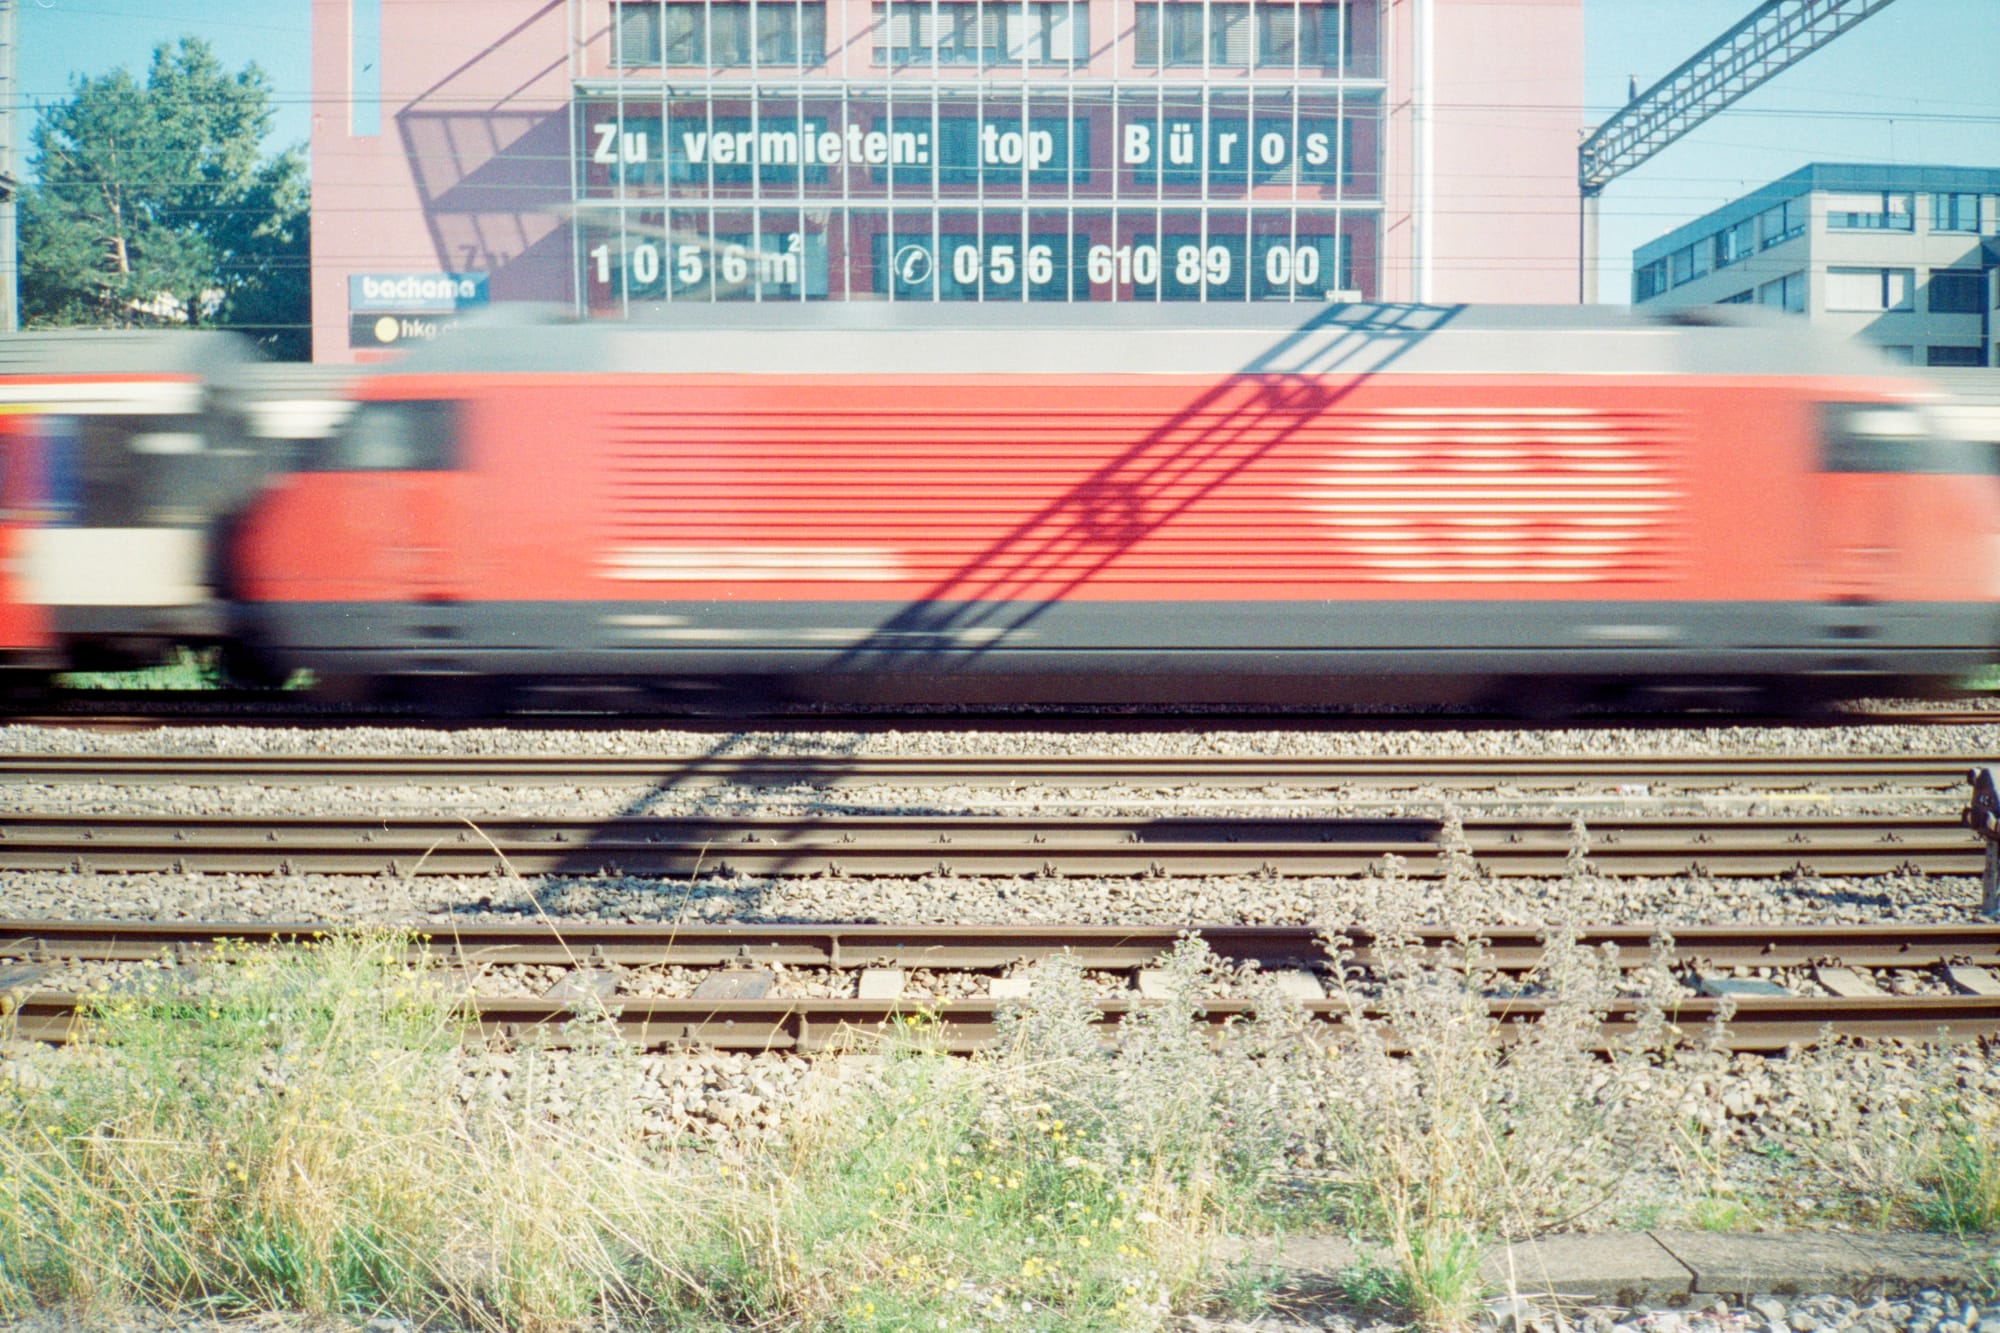 A red electric locomotive (SBB Re 460) thunders past, on a four track railway, hauling a passenger train. Overhead power stanchions cast a shadow across the loco. Behind, an industrious building with text in the windows: "Zu vermieten: Top Büros, 1056m²" plus a phone number.